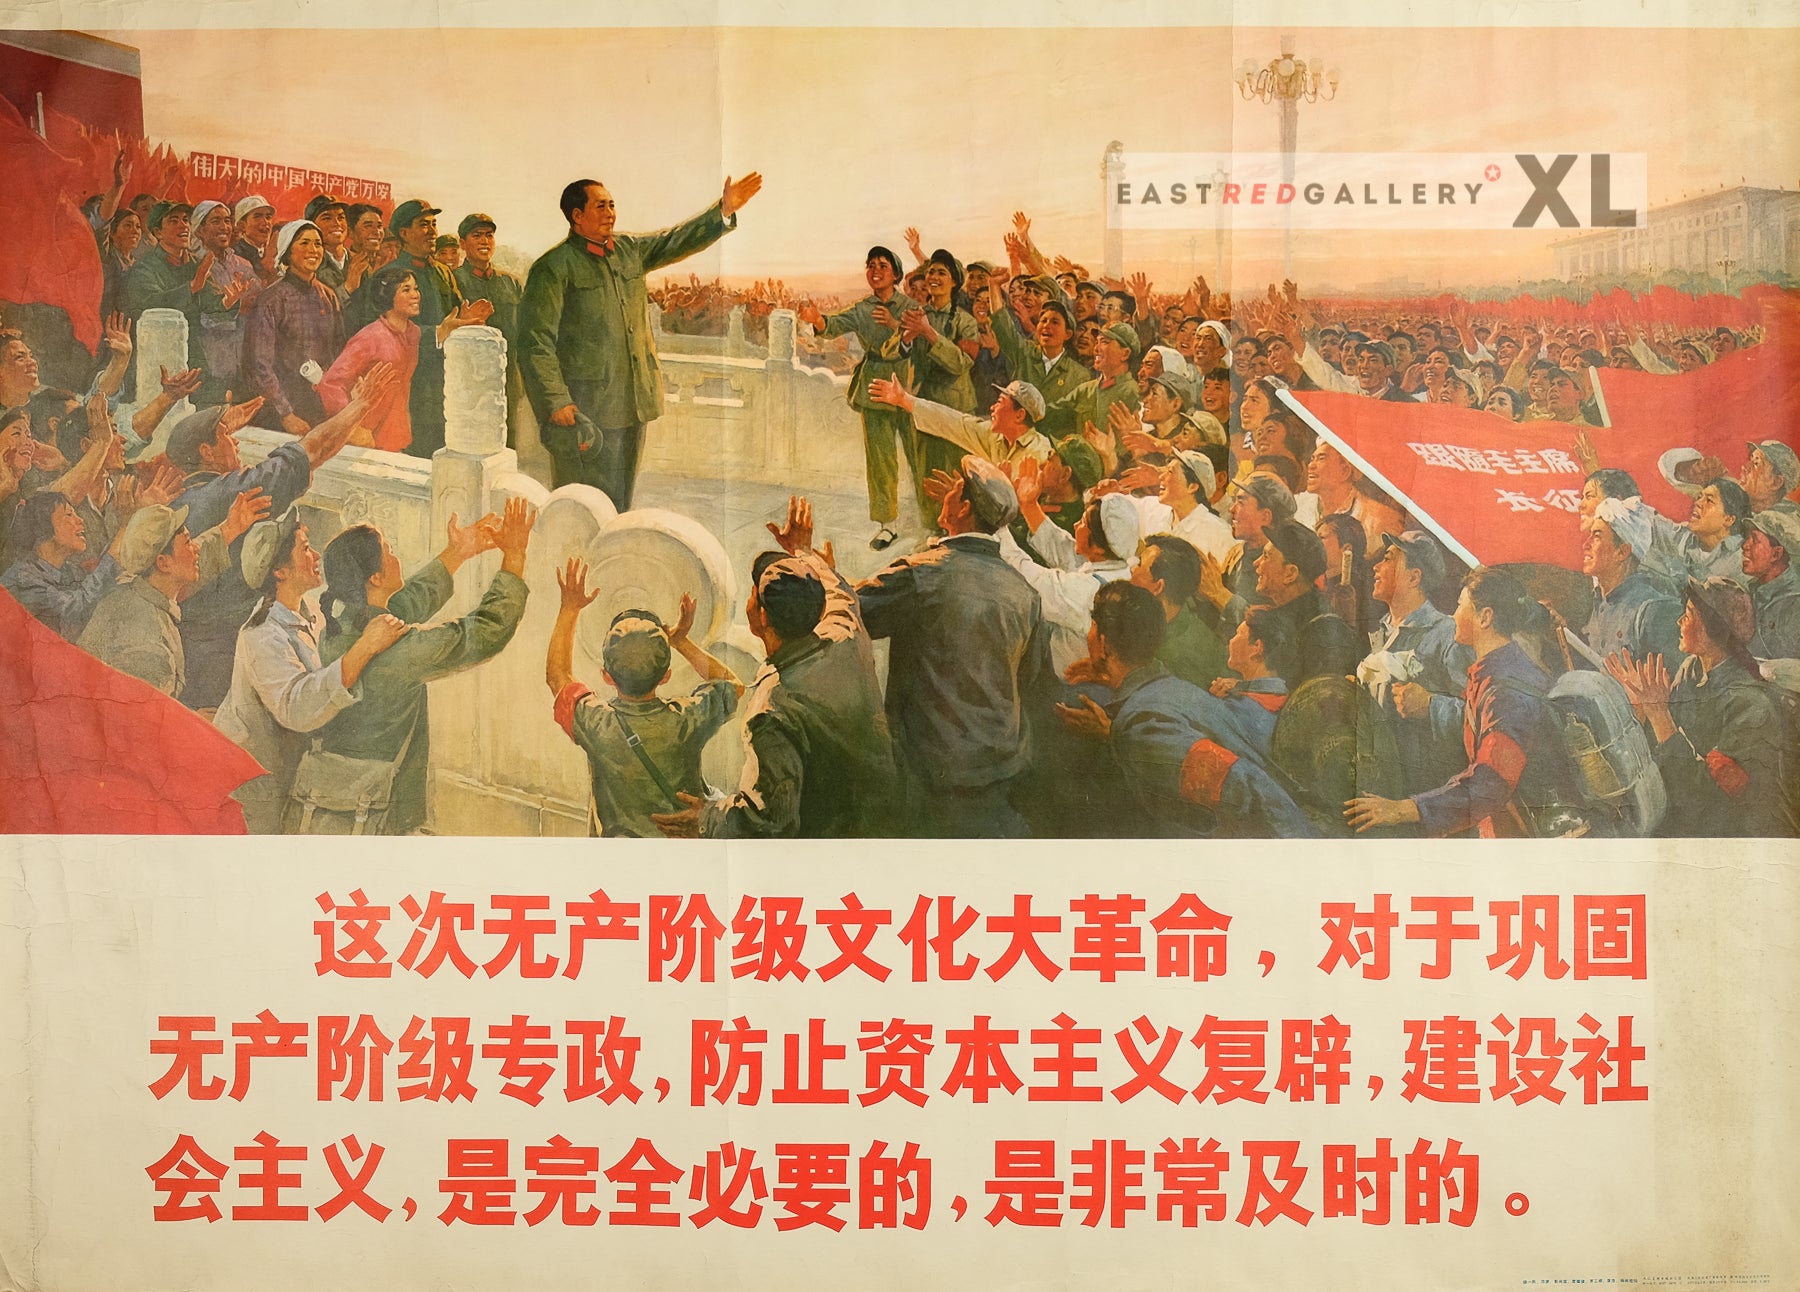 image of 1976 Chinese poster This Great Proletarian Cultural Revolution is completely necessary and timely for consolidating the dictatorship of the proletariat, preventing the restoration of capitalism and building socialism